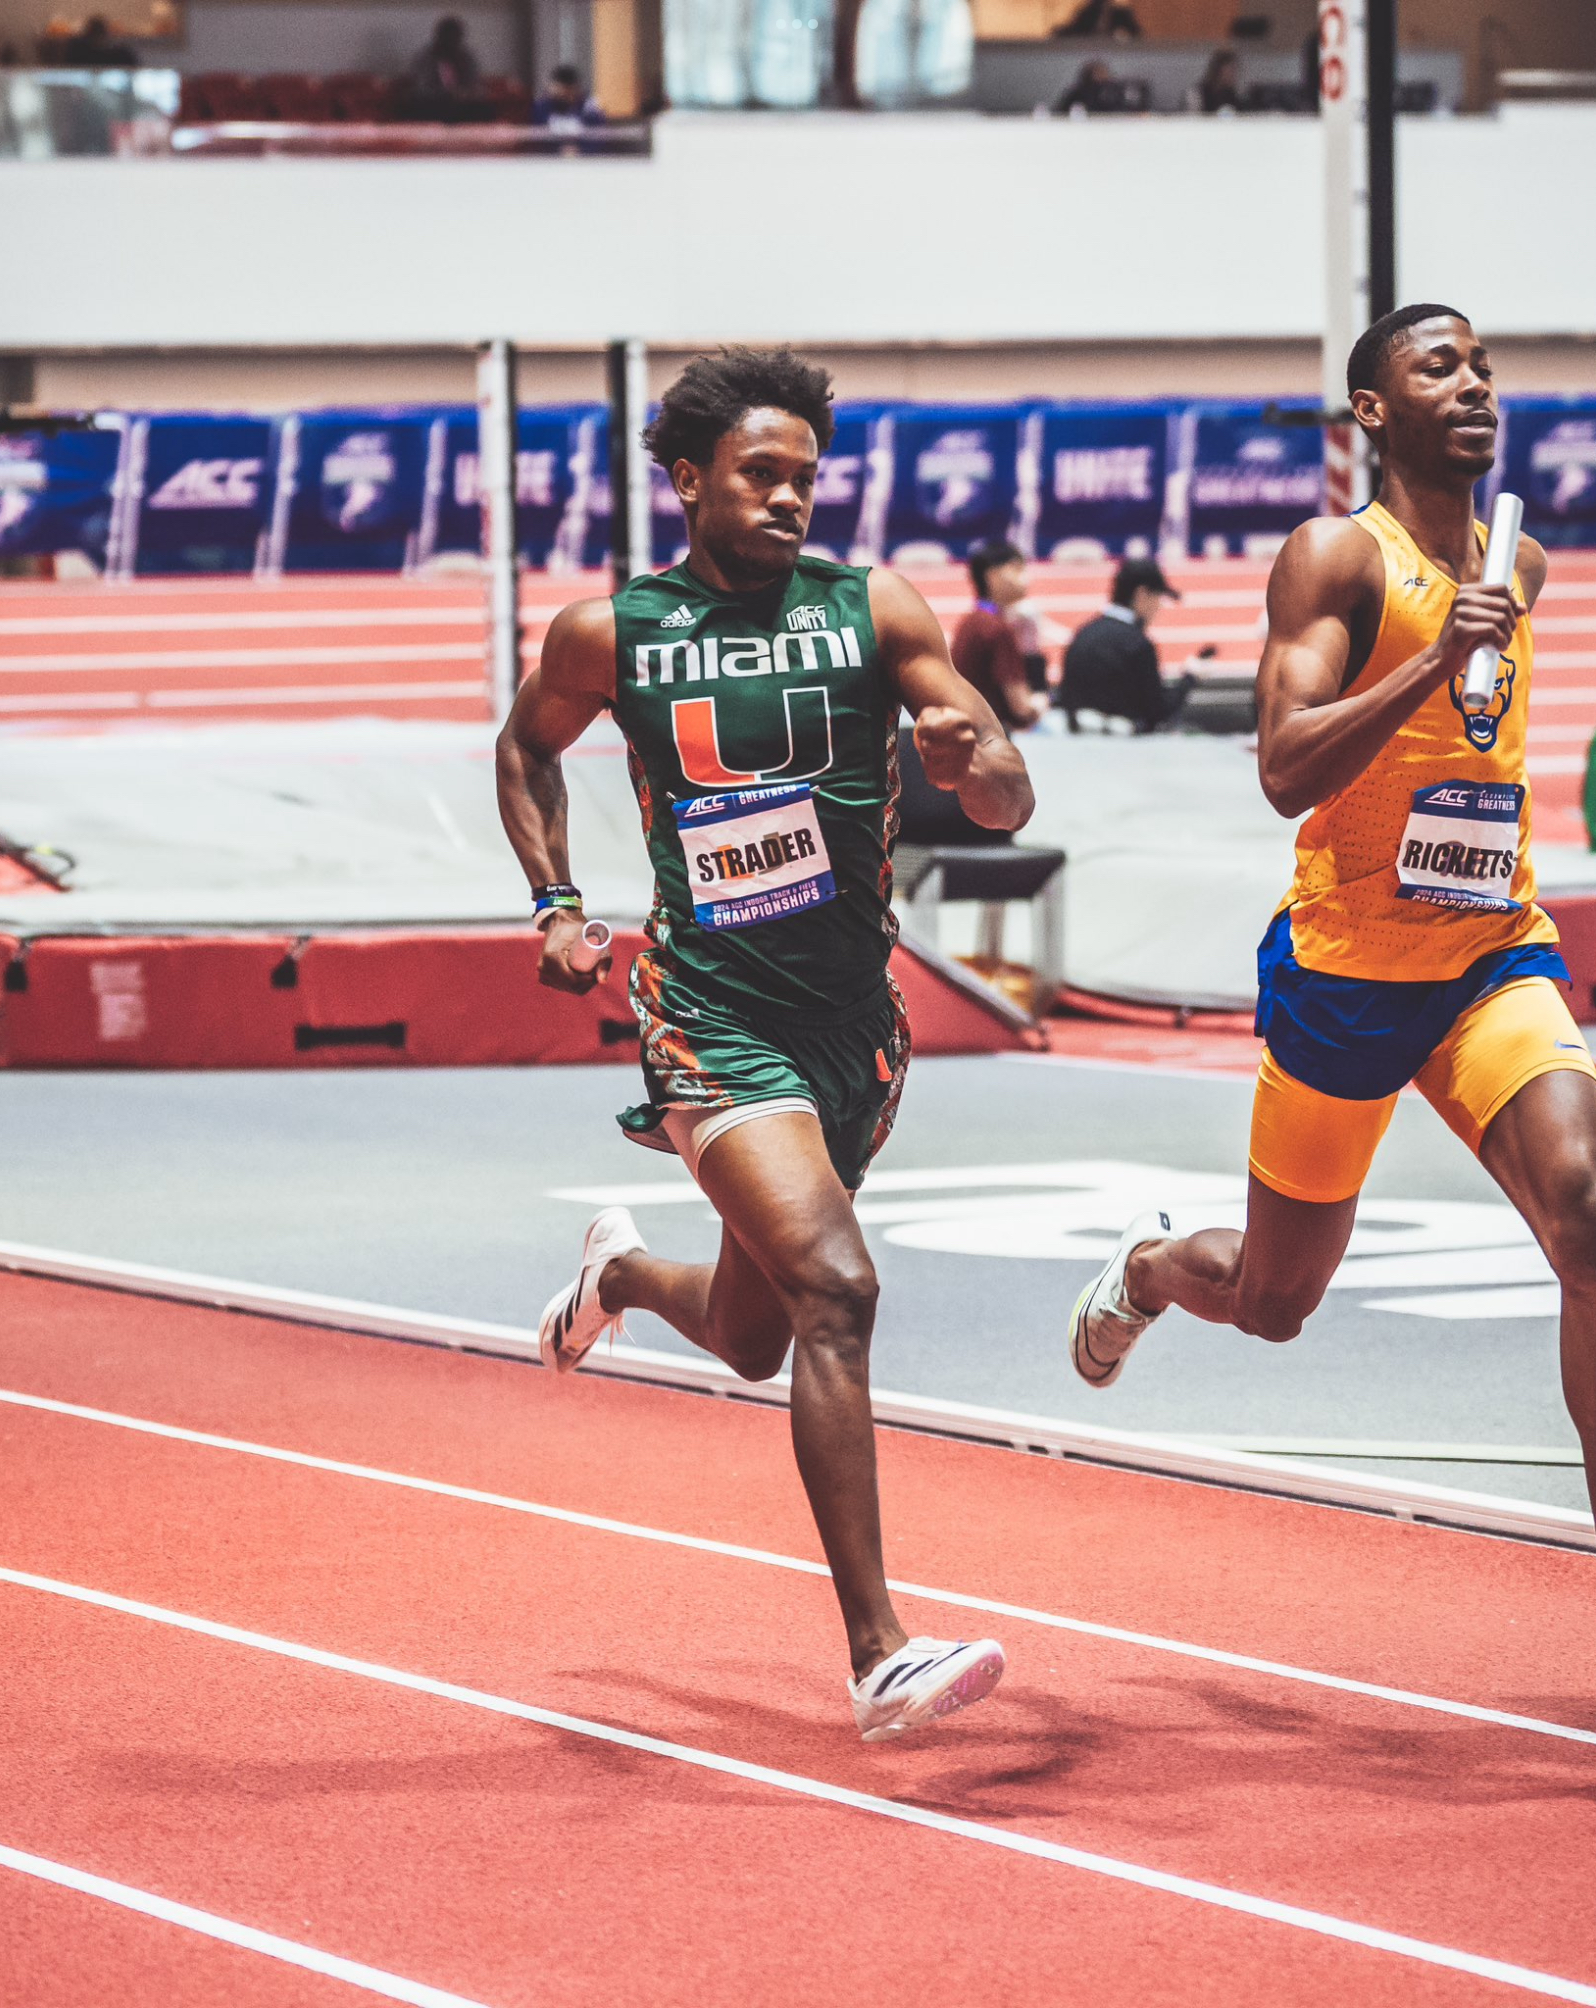 Miami sets records in the ACC indoor track and field championships